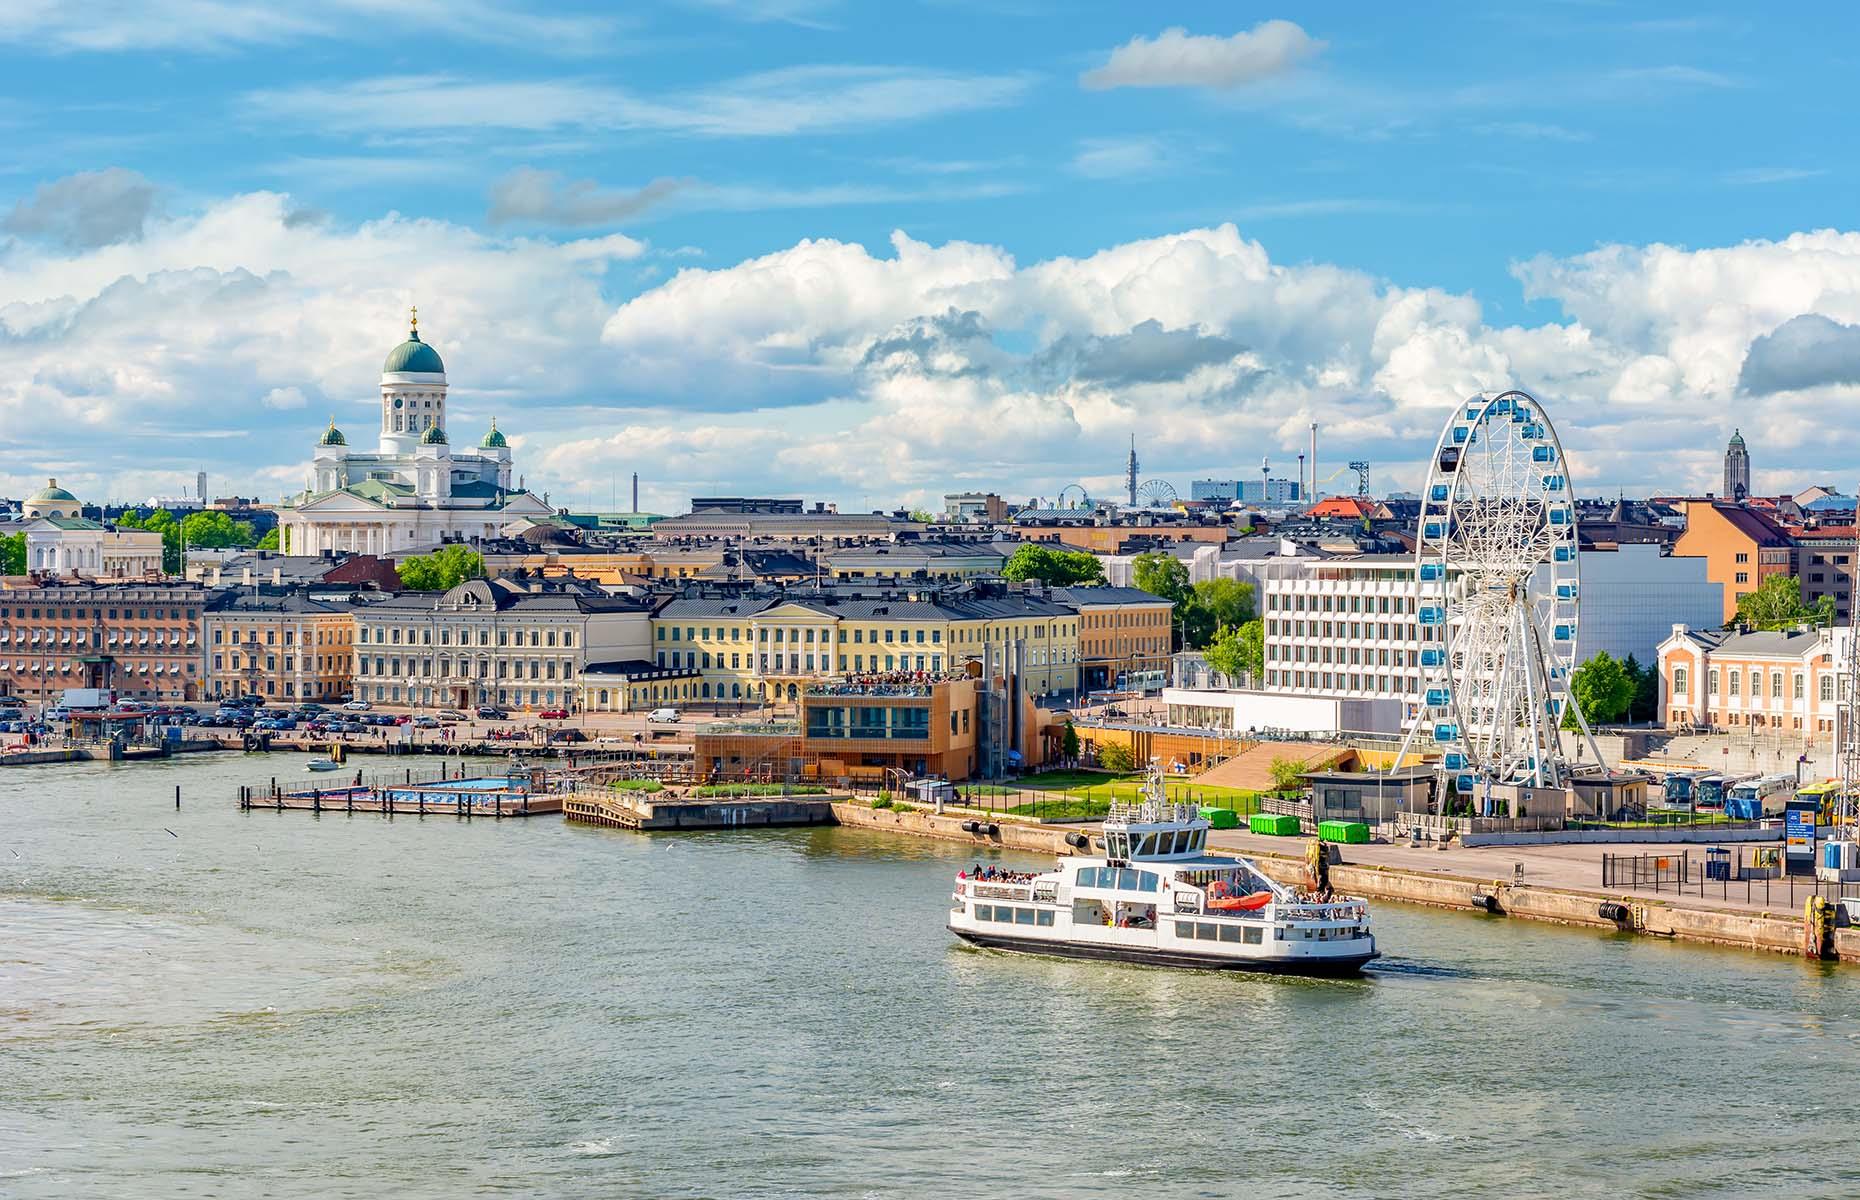 <p>Stockholm and Copenhagen tend to overshadow Helsinki when it comes to Nordic city breaks, but this cool capital has plenty to offer. Great museums, striking buildings (like <a href="https://www.finlandiatalo.fi/en/">Finlandia Hall</a> overlooking Töölönlahti Bay and Sibelius Monument), cool boutiques and hip designer hotels make Finland's capital a more-than-worthy contender. There's a pretty harborside area, the UNESCO-listed island fortress of <a href="https://www.suomenlinna.fi/en/">Suomenlinna</a>, a fantastic food scene and a plethora of saunas too.</p>